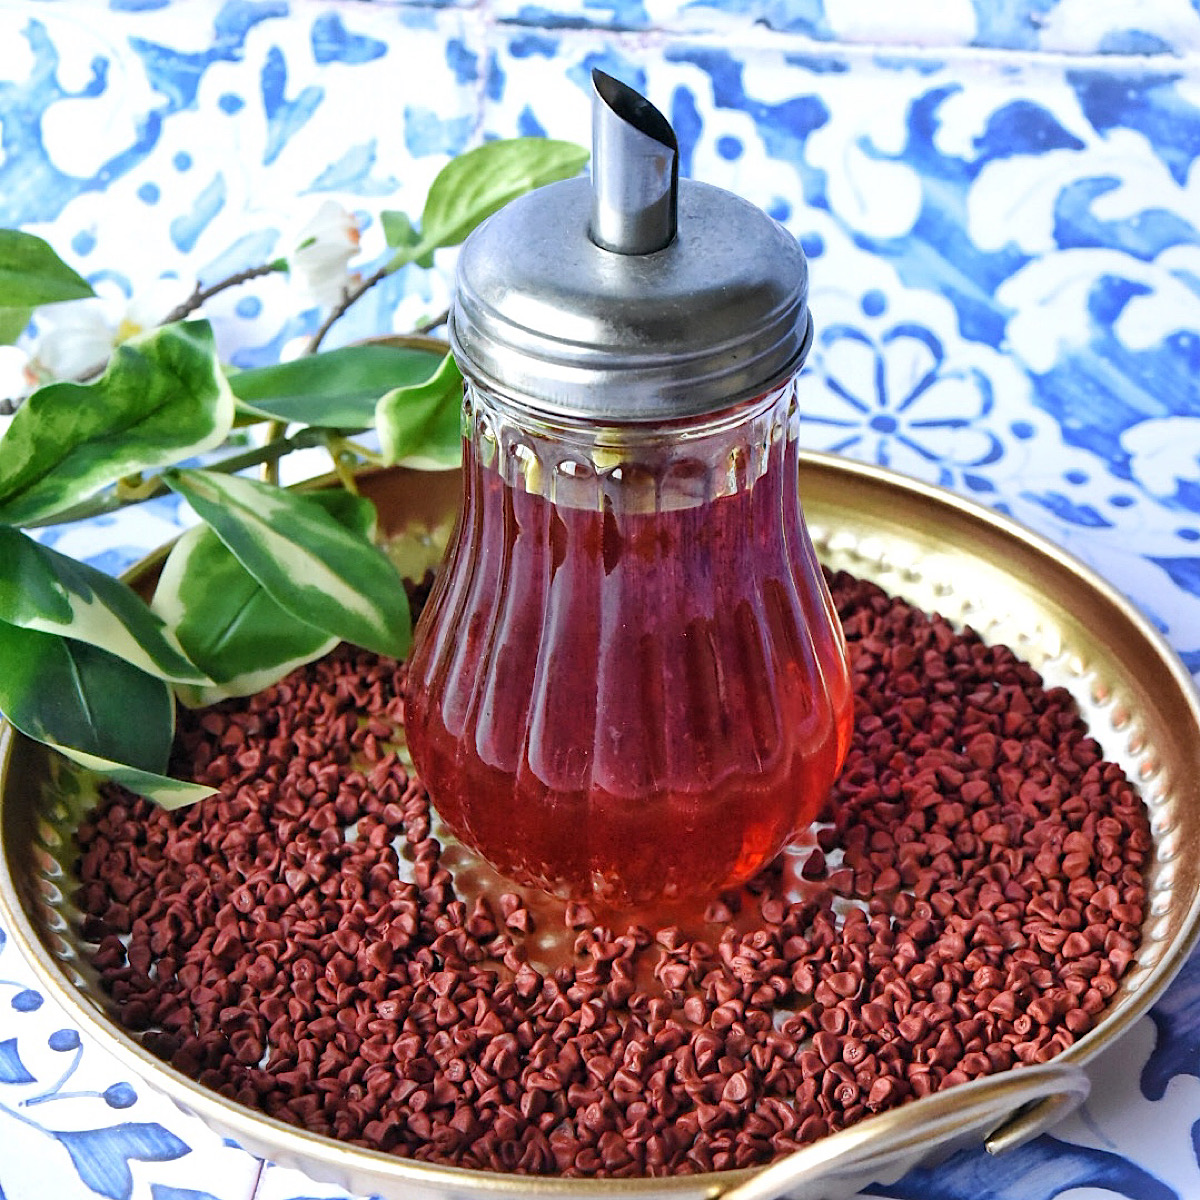 Achiote Oil: For Color and Taste